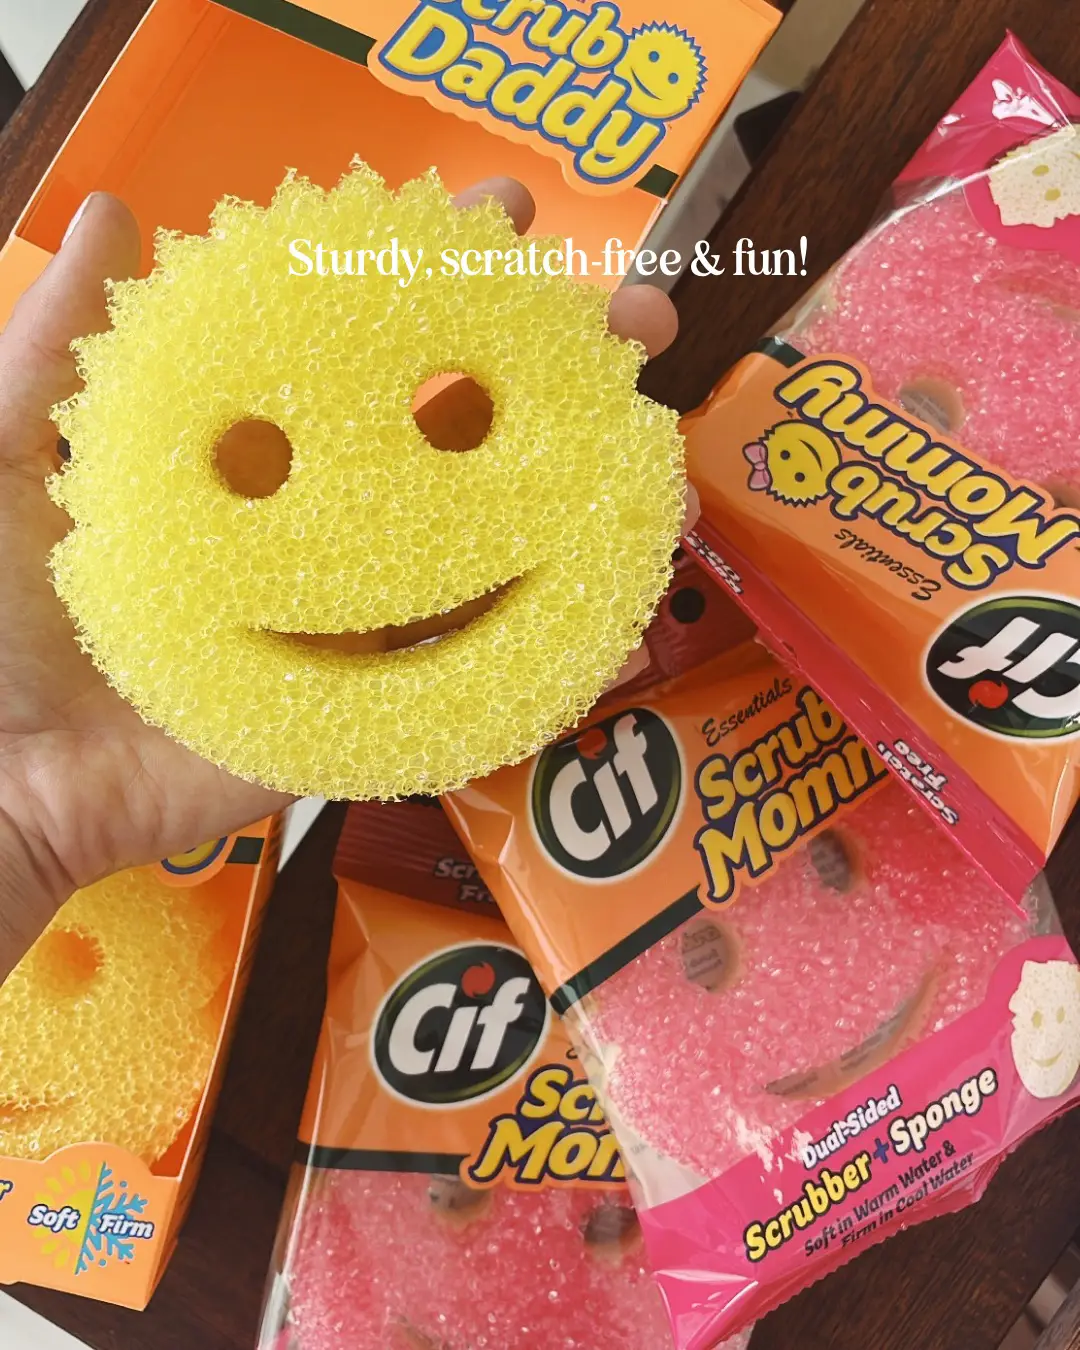 The difference between Scrub Daddy and Scrub Mommy 